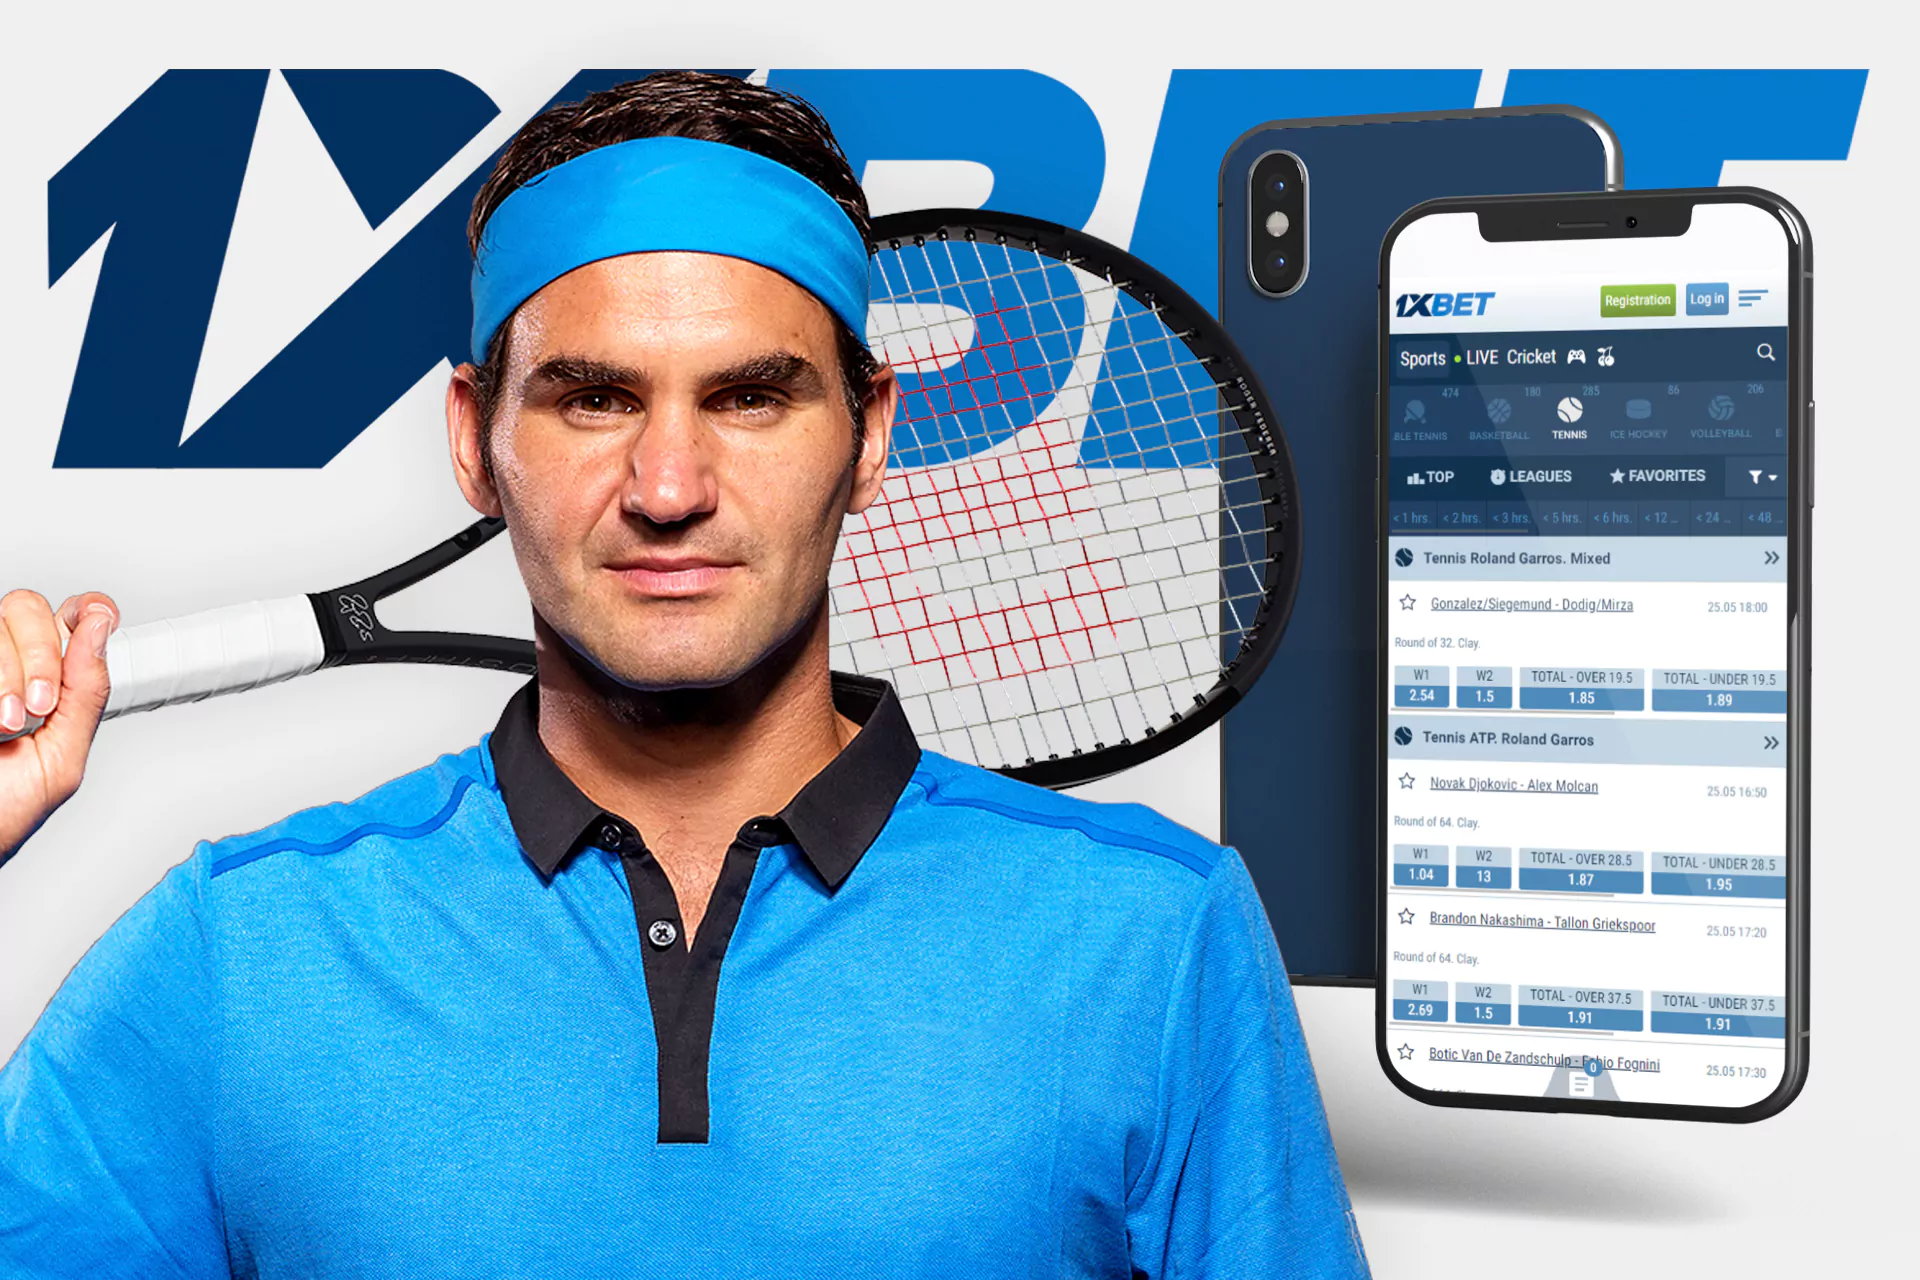 Install the app to place bets on tennis.